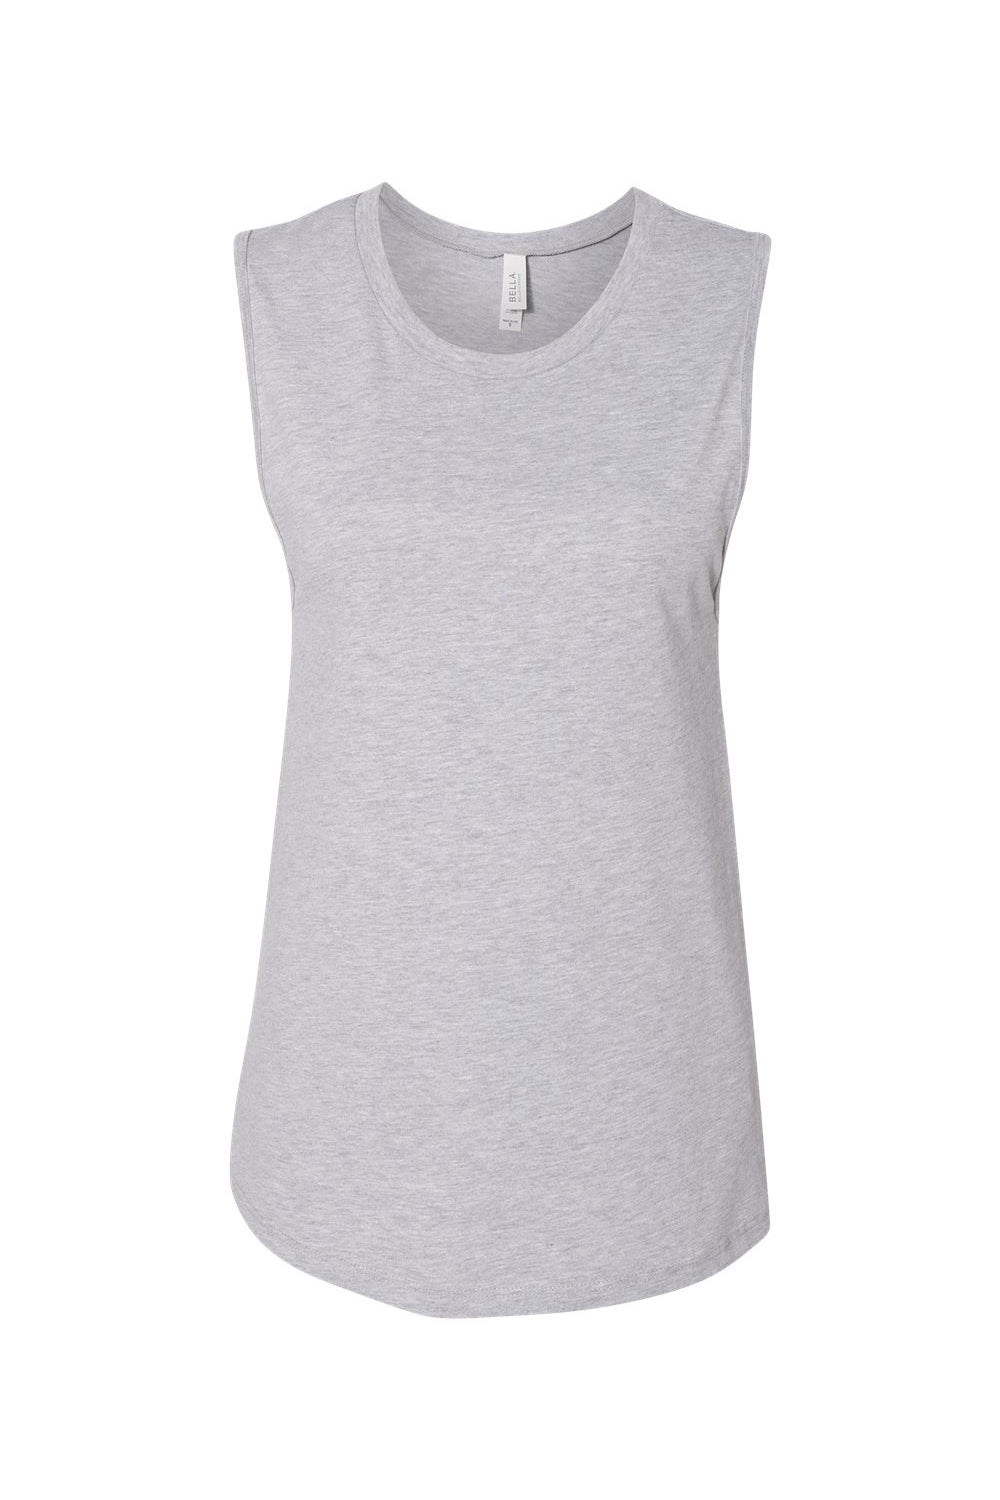 Bella + Canvas BC6003/B6003/6003 Womens Jersey Muscle Tank Top Heather Grey Flat Front